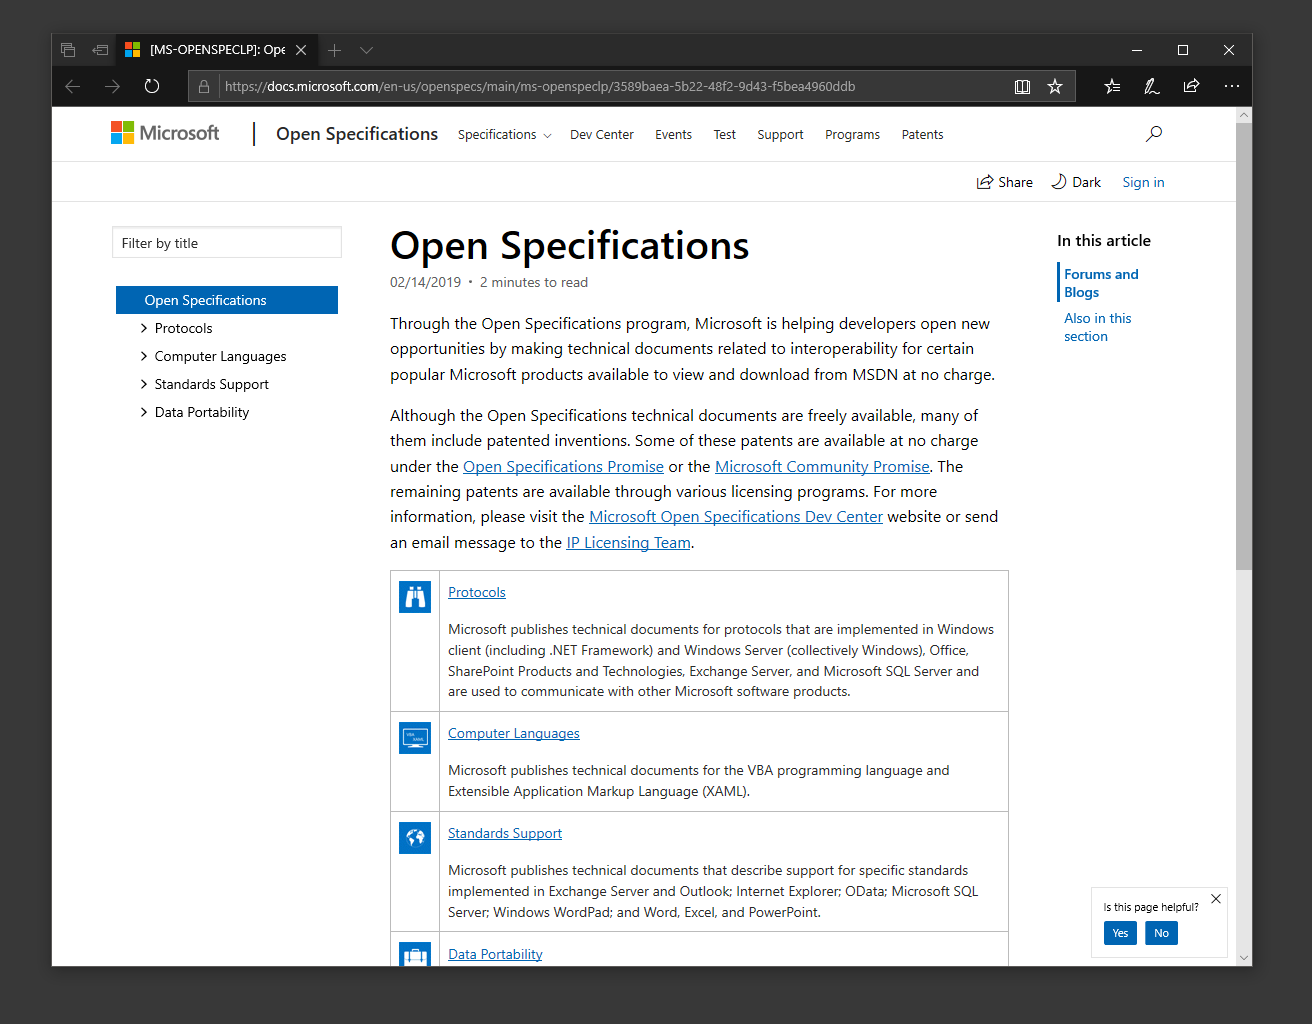 Grouping of Open Specifications content in the table of contents